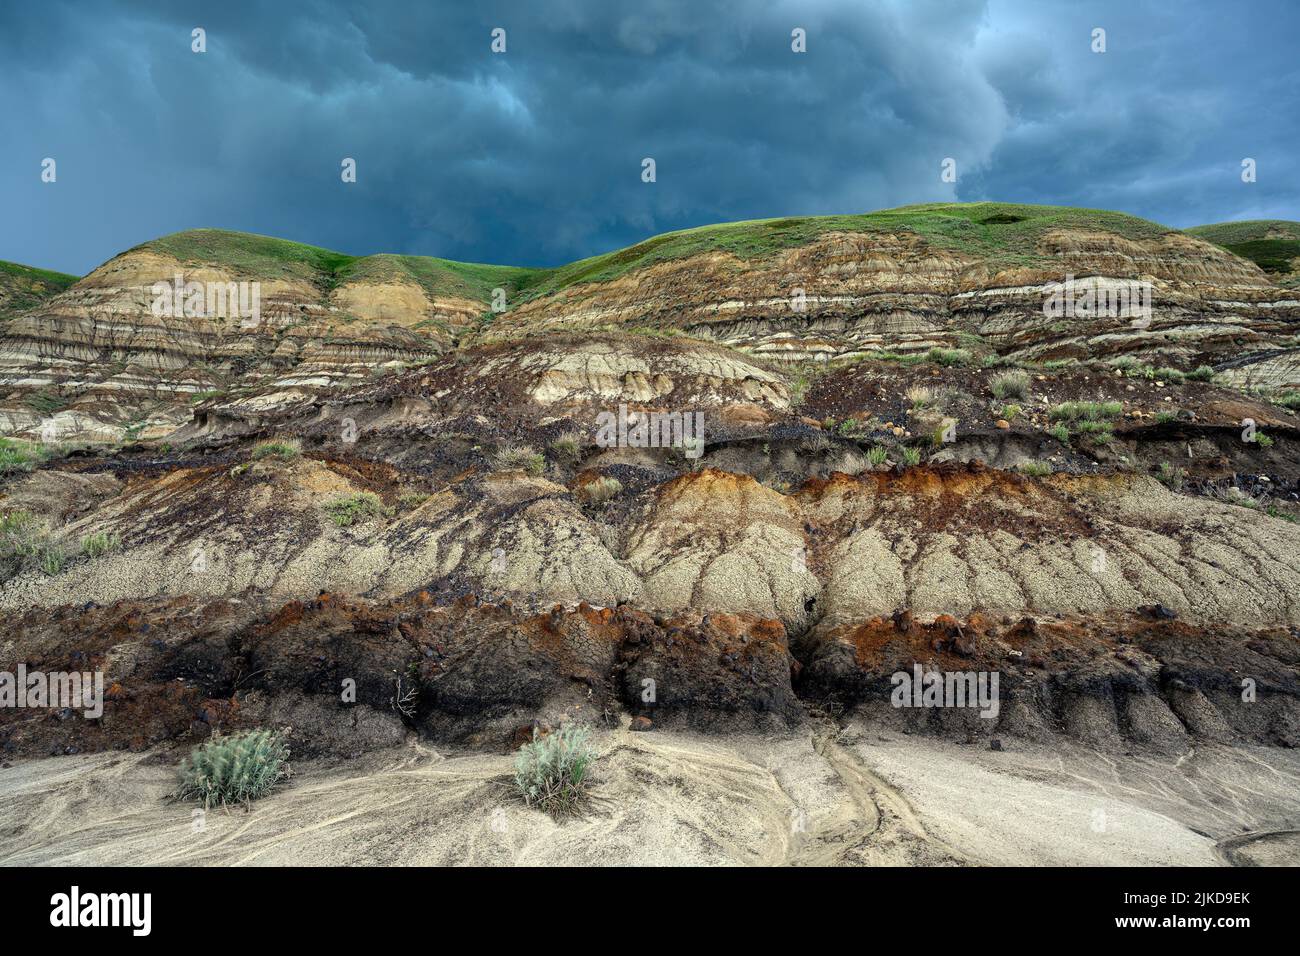 Stormy clouds over the landscape of the Canadian Badlands of Drumheller, the dinosaur capital of the world in Red Deer River Valley, Alberta, Canada. Stock Photo